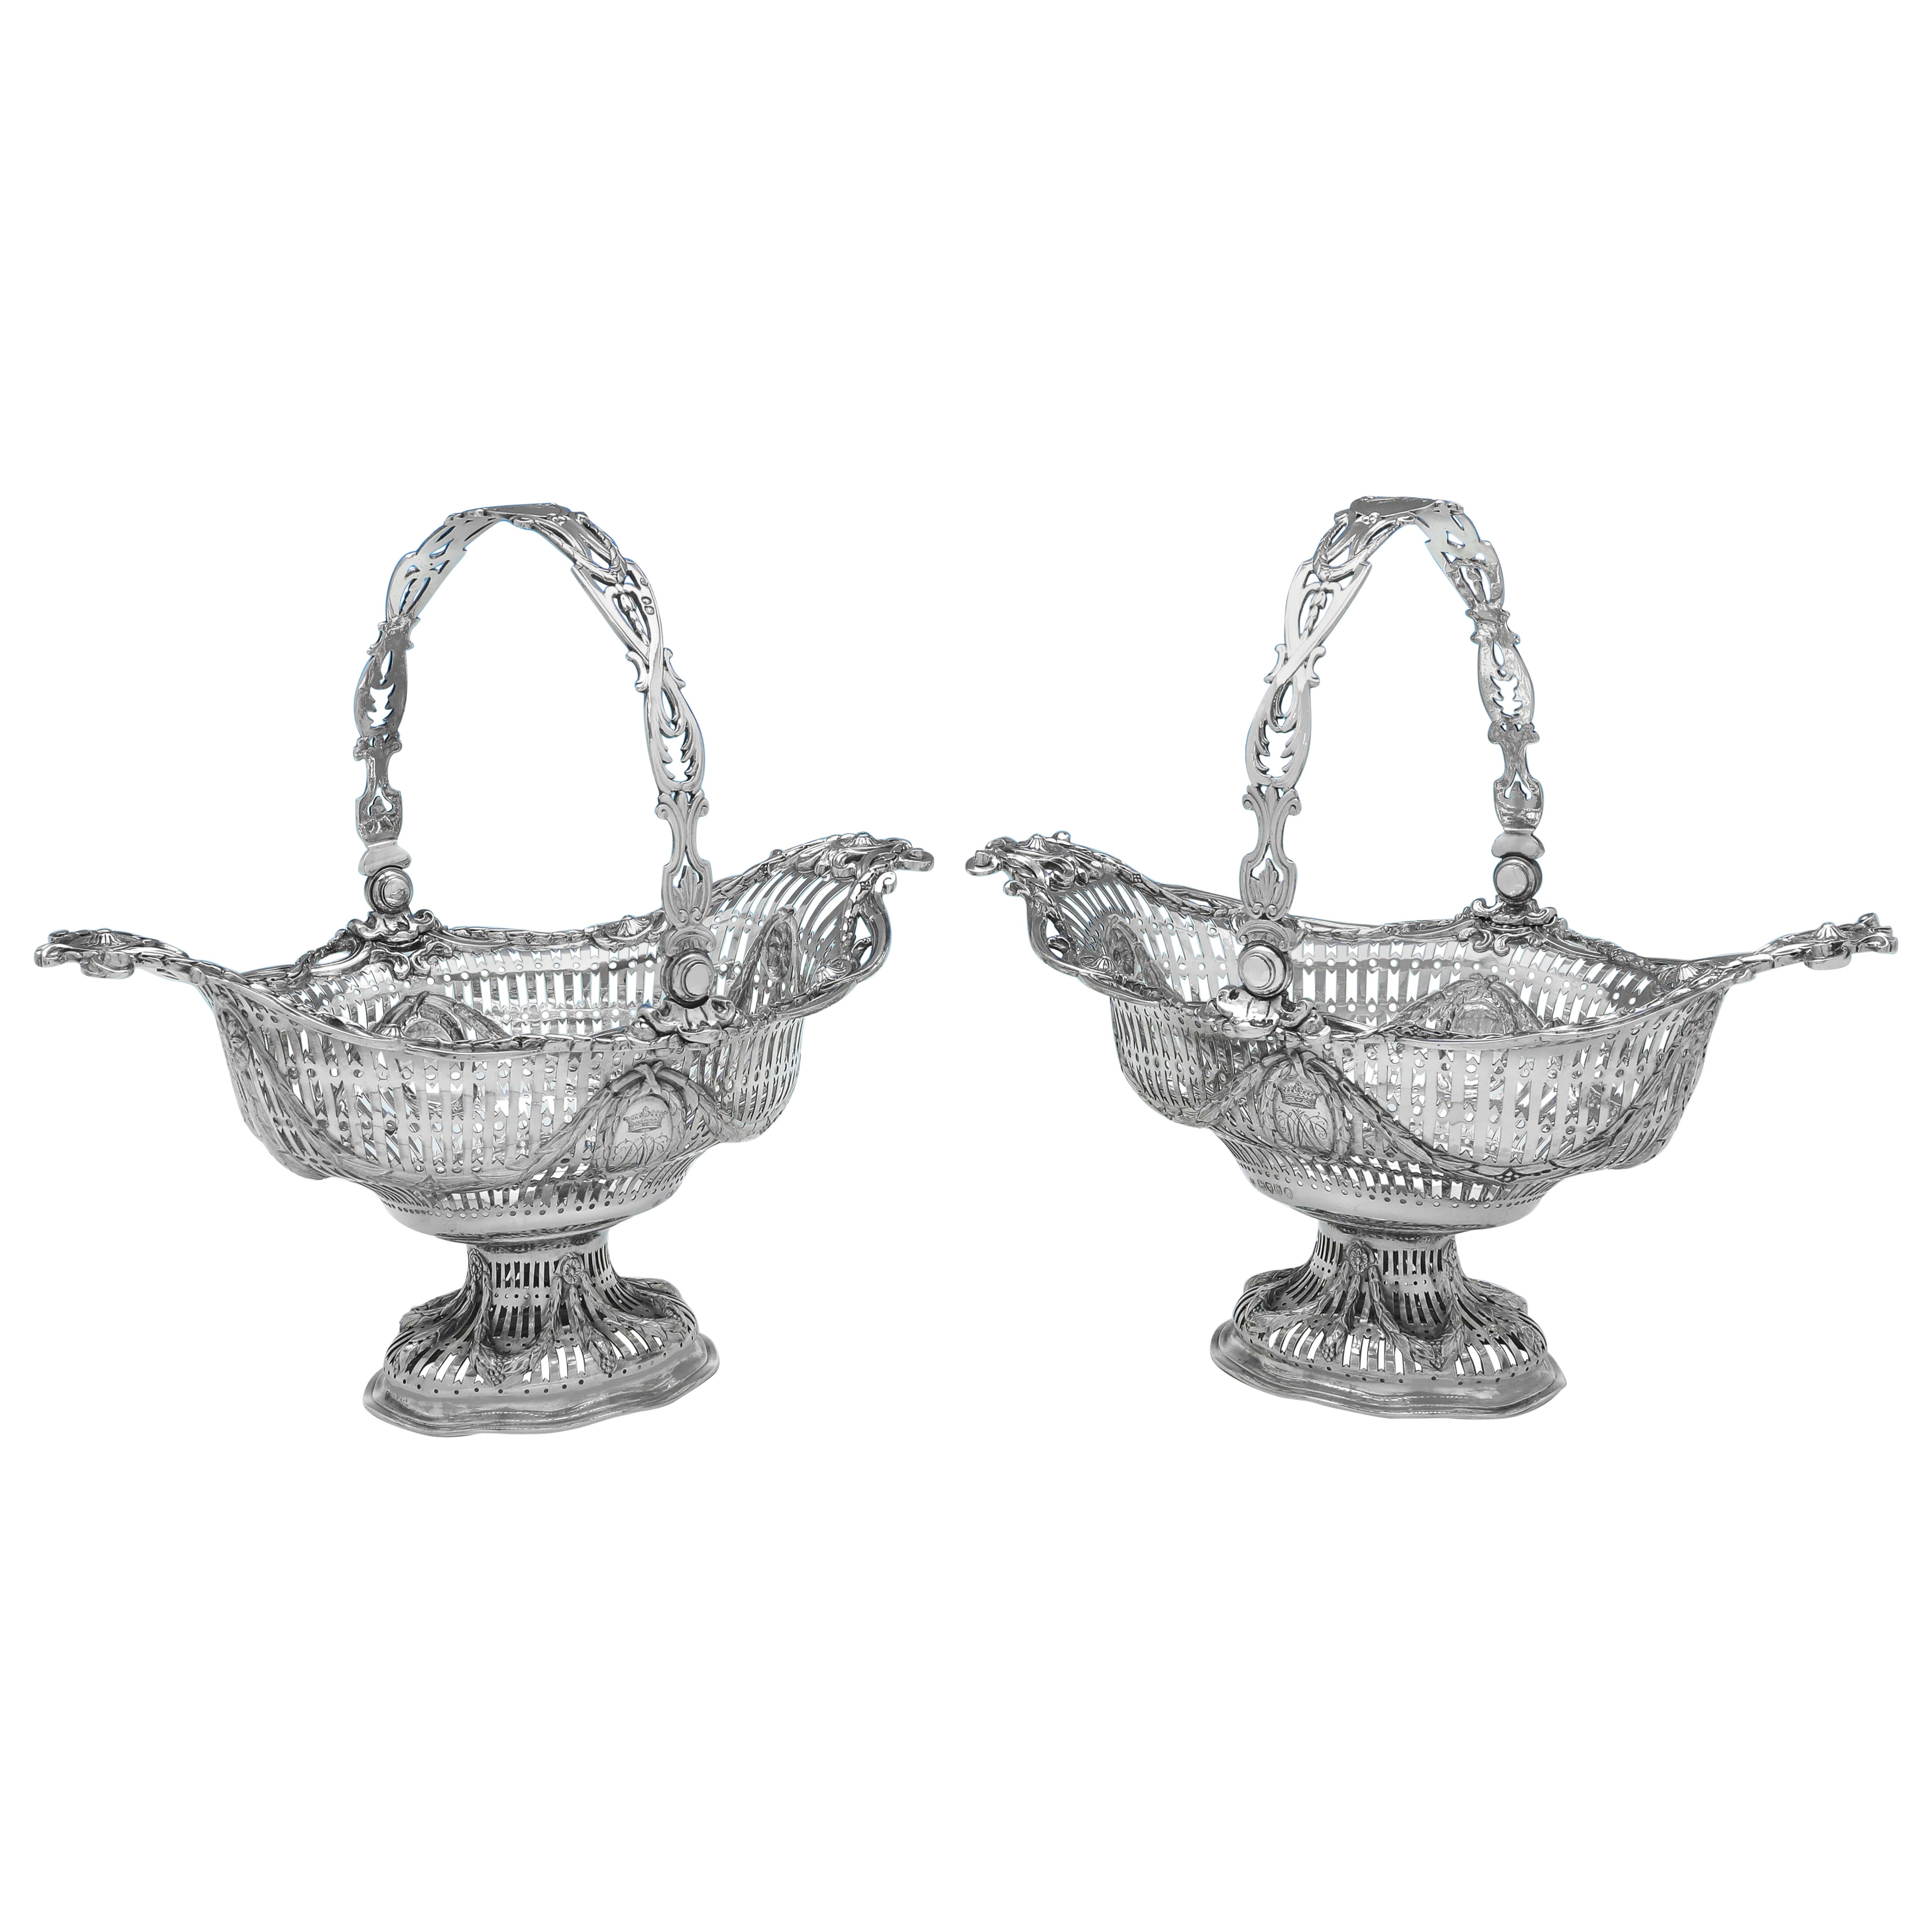 Very attractive pair of antique sterling silver baskets - George Fox London 1882